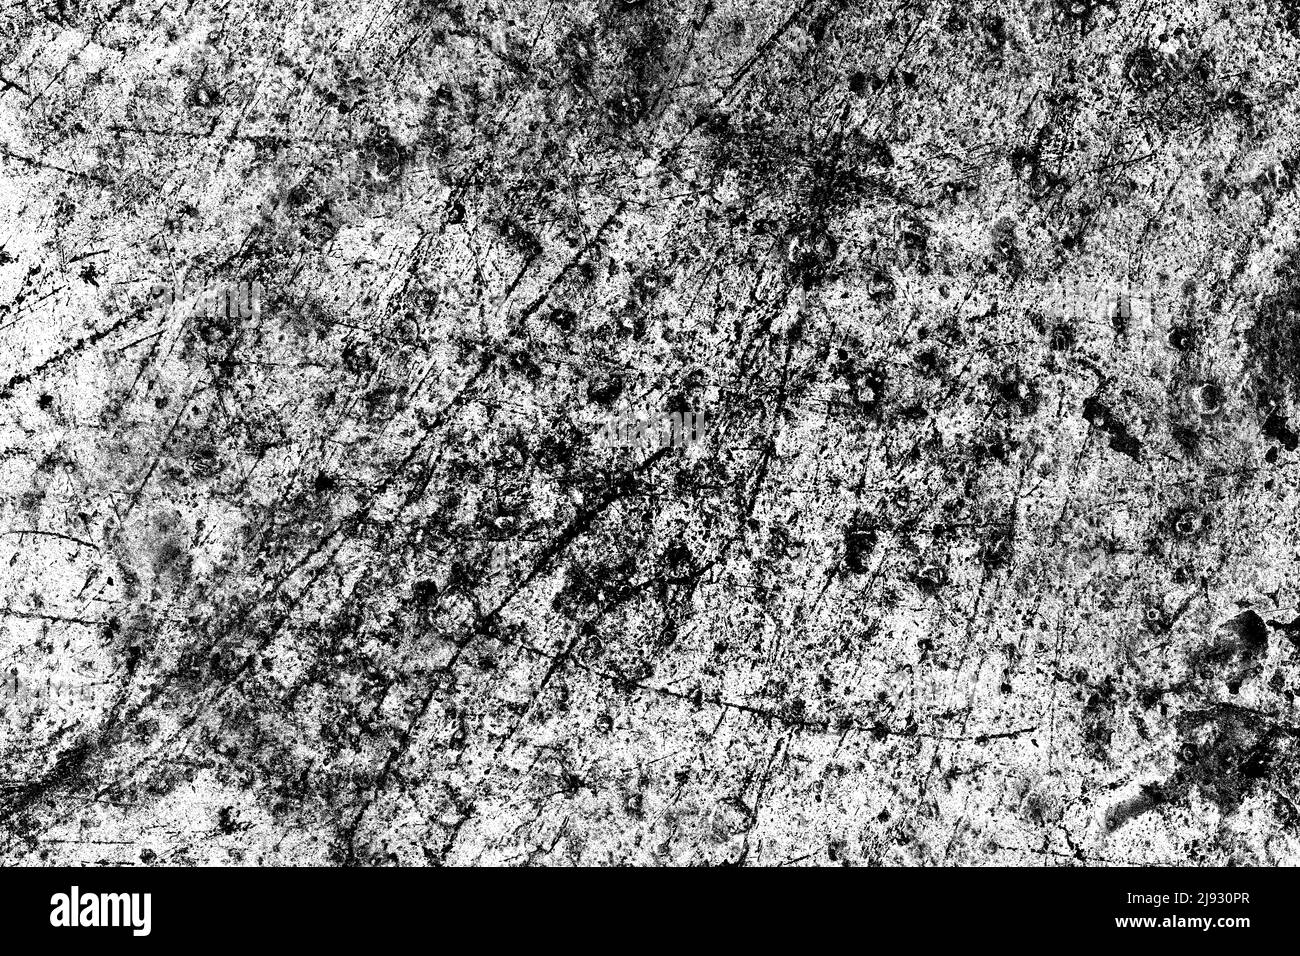 Scratched dirty metal sheet with heavy grunge texture Stock Photo